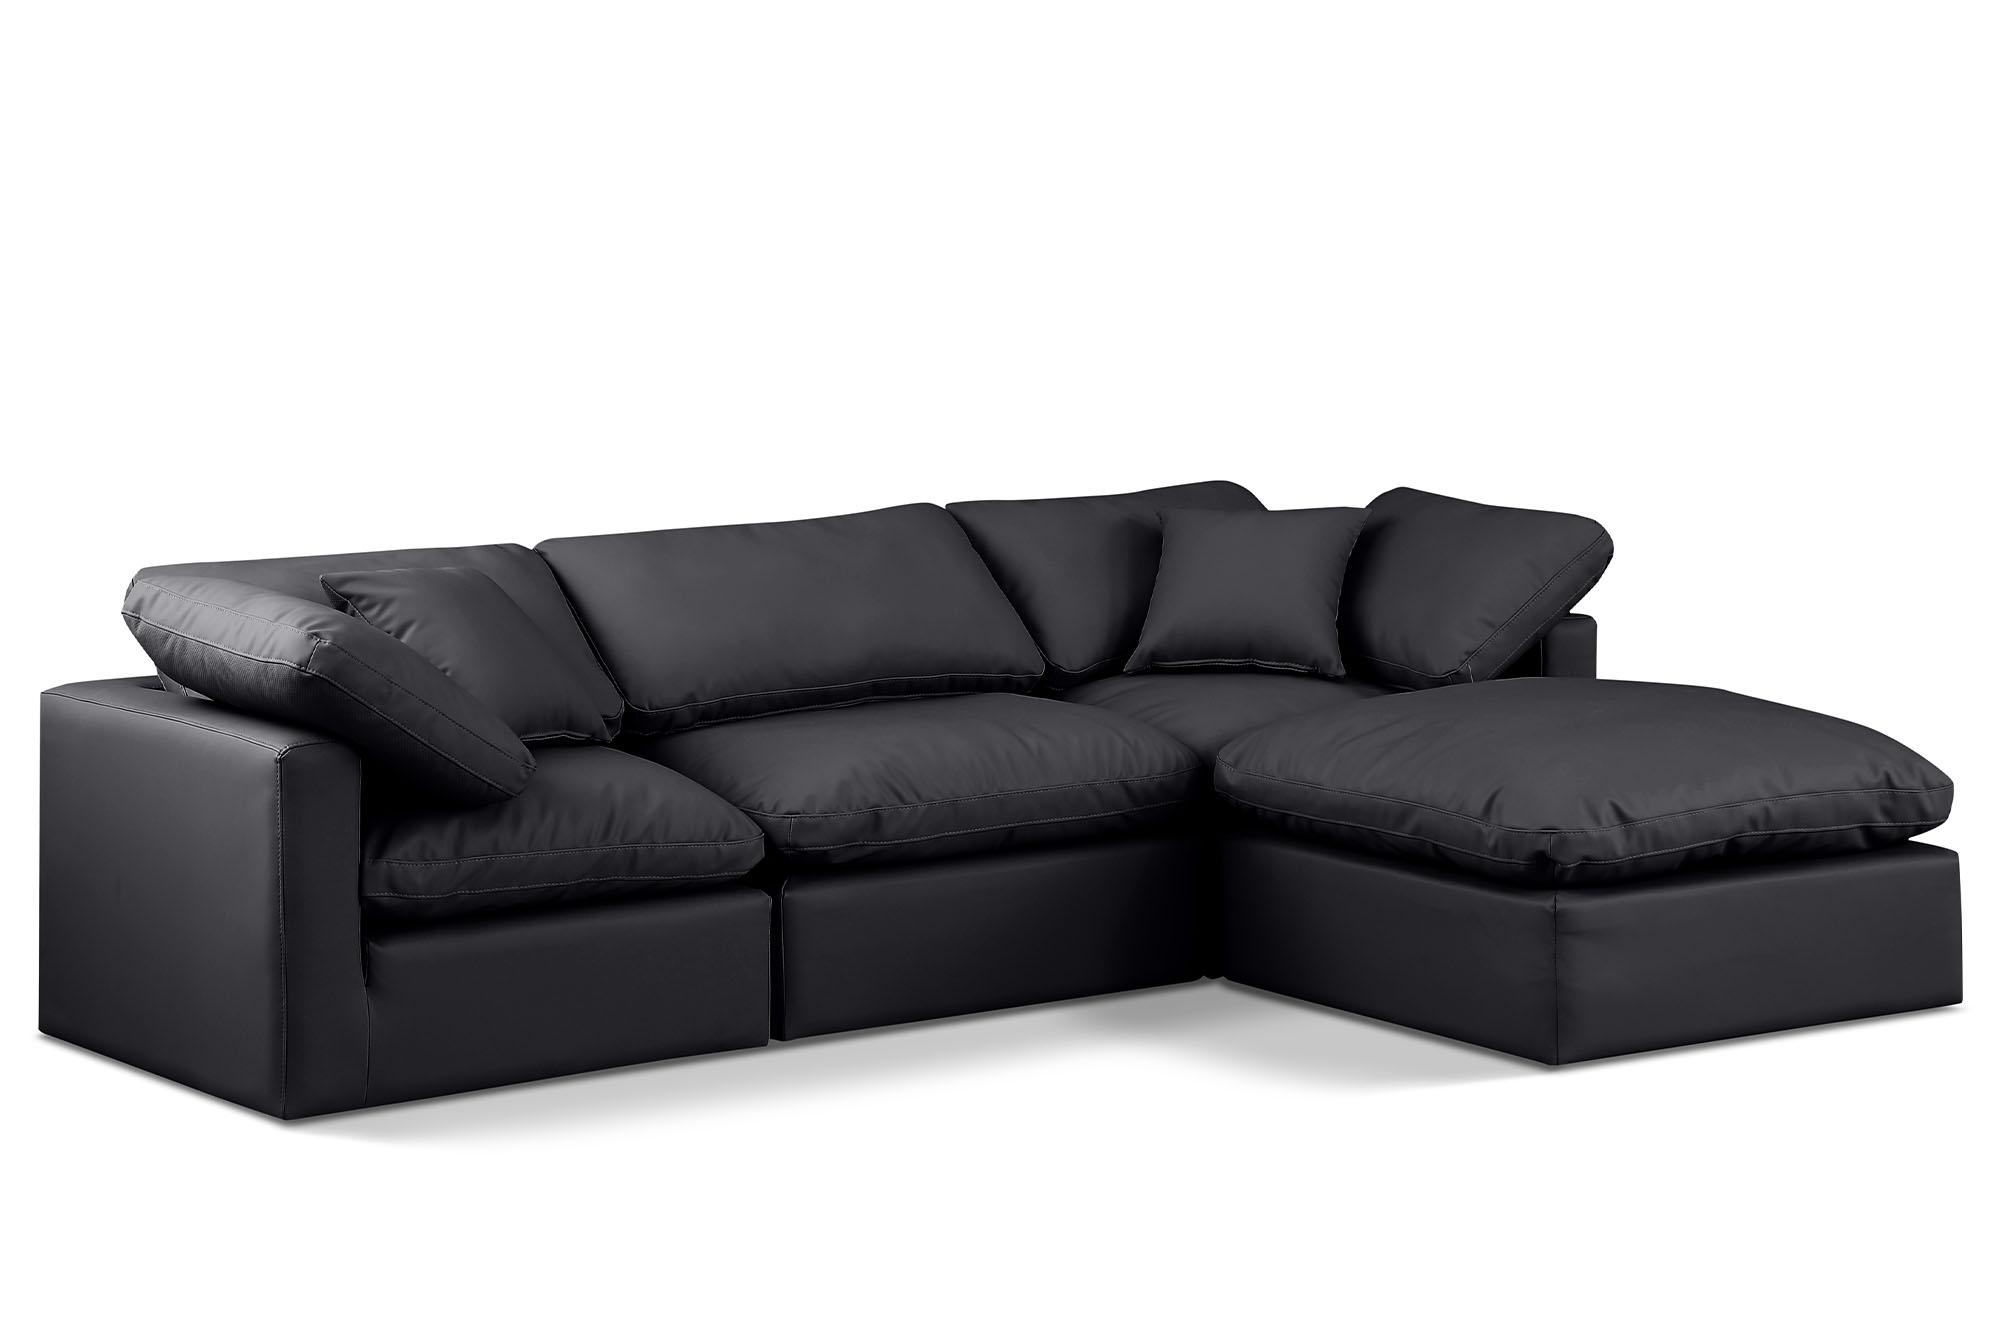 Contemporary, Modern Modular Sectional Sofa INDULGE 146Black-Sec4A 146Black-Sec4A in Black Faux Leather